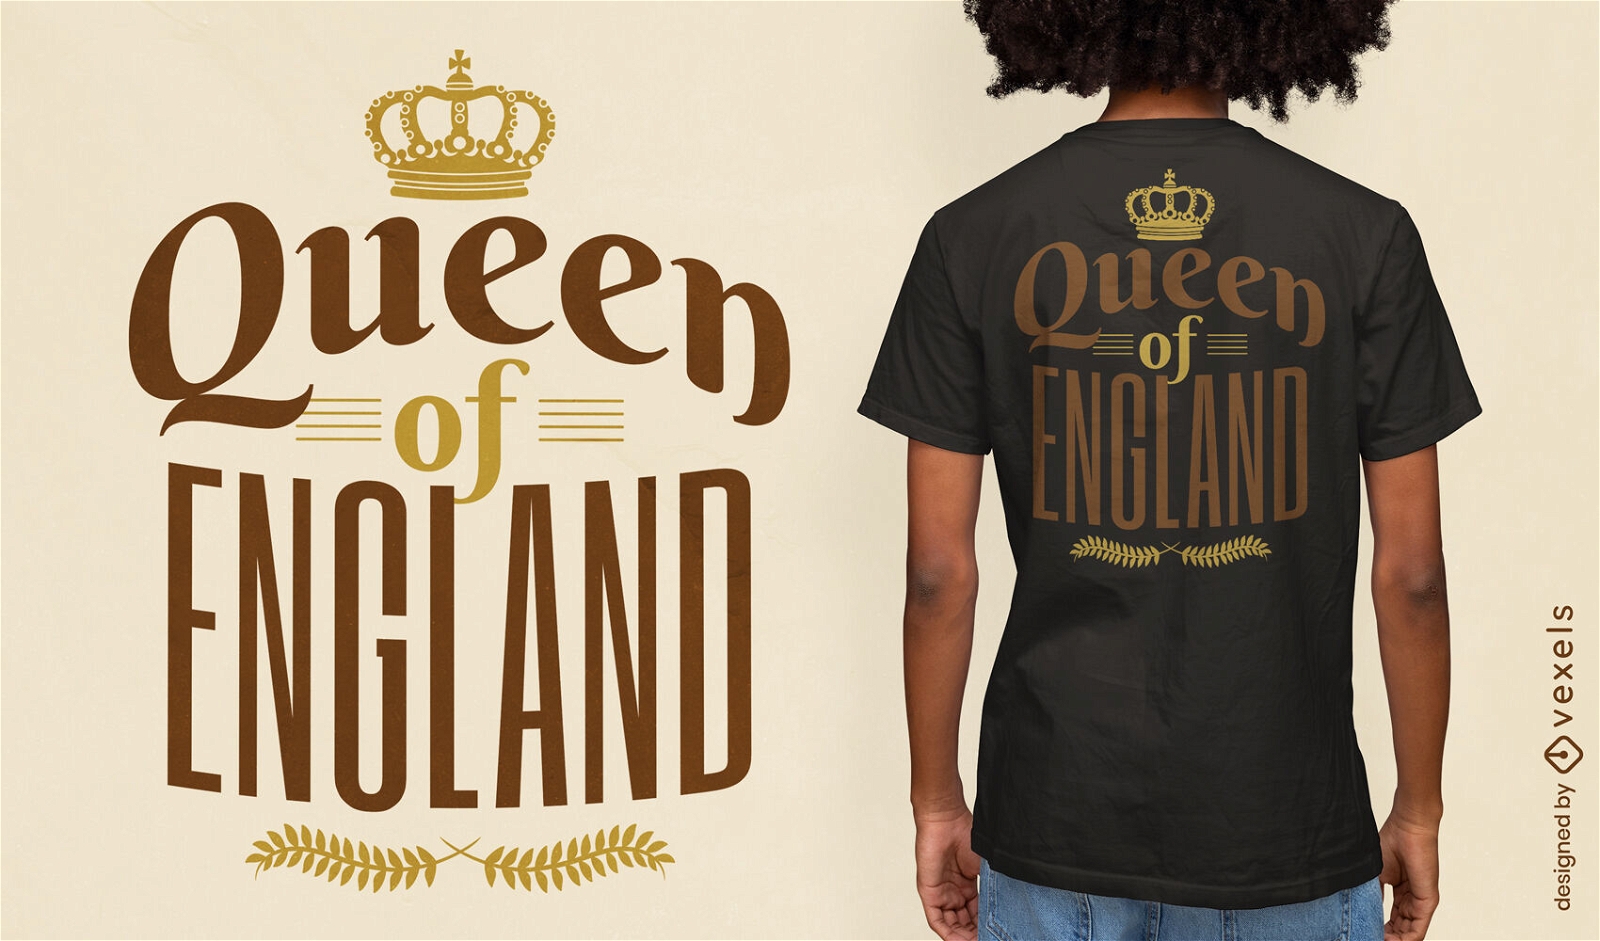 Queen of england quote t-shirt design